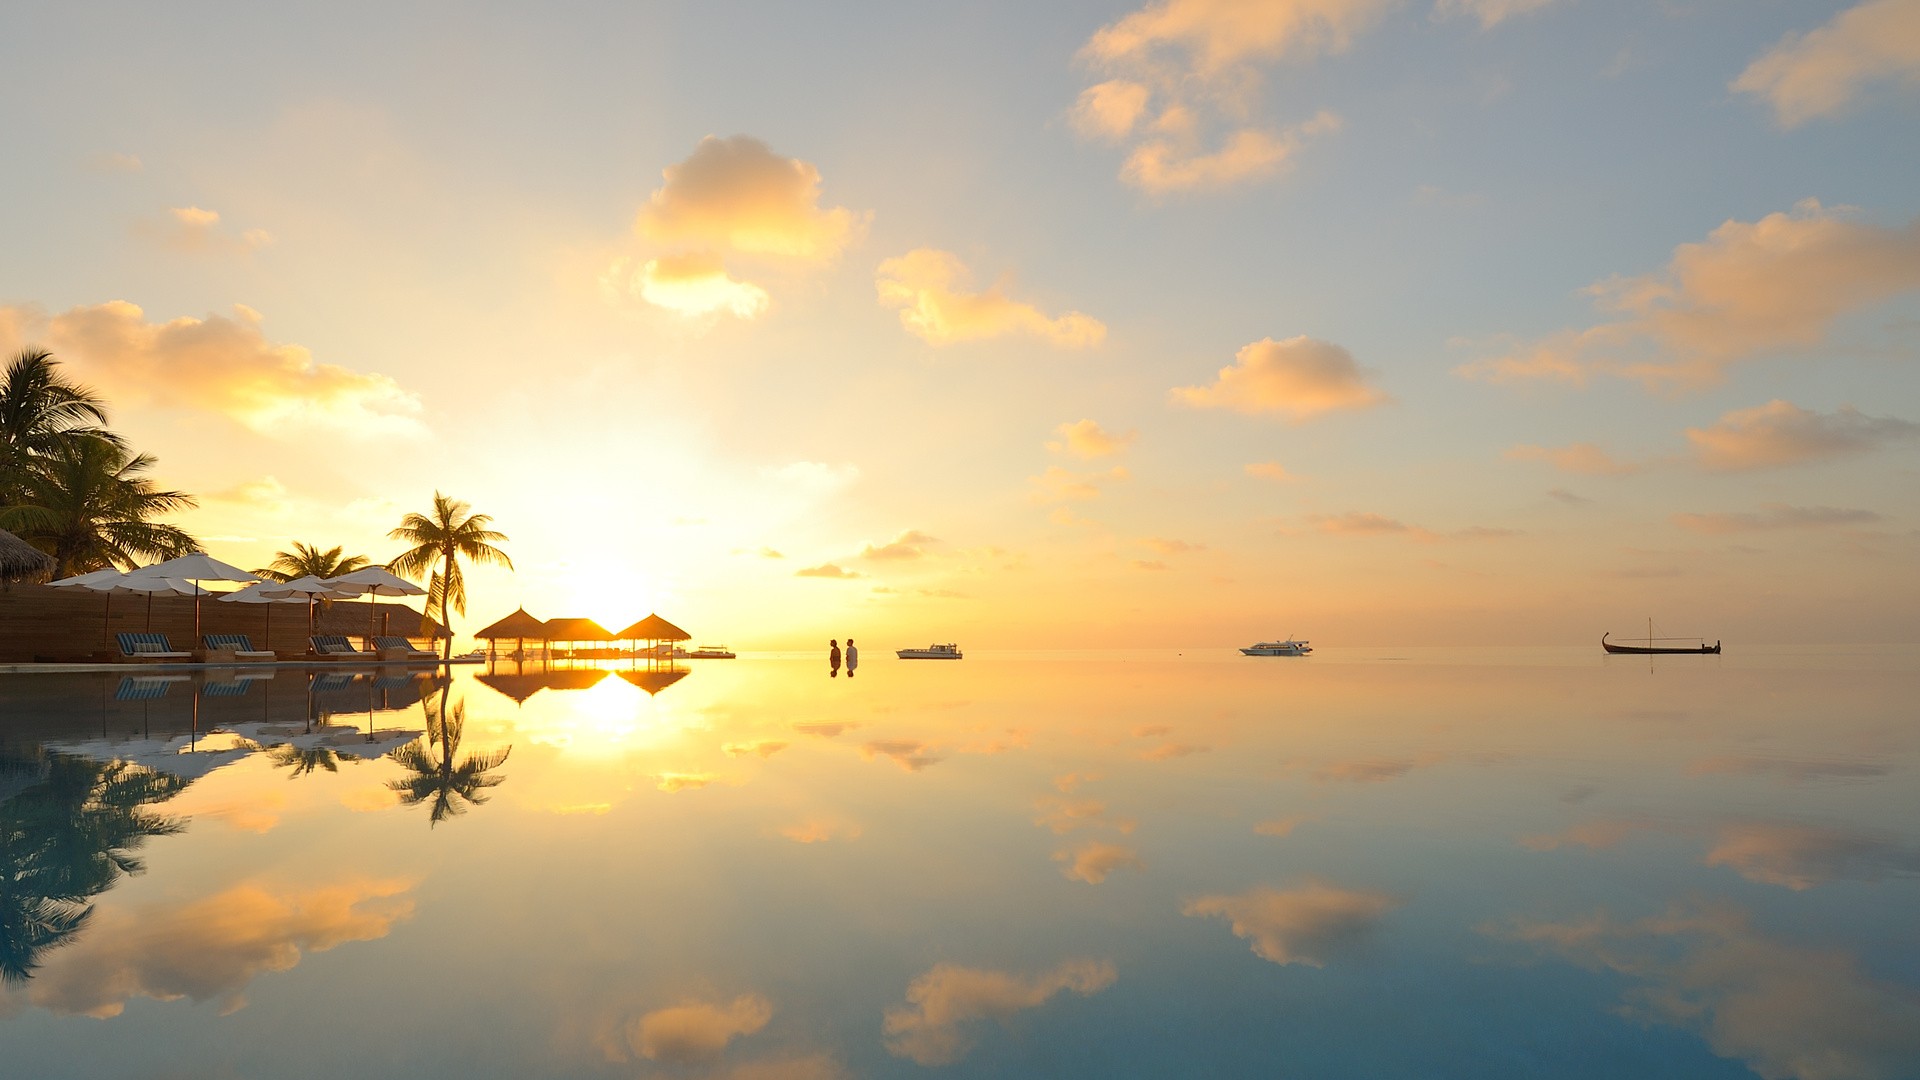 General 1920x1080 beach sky sea clouds reflection palm trees